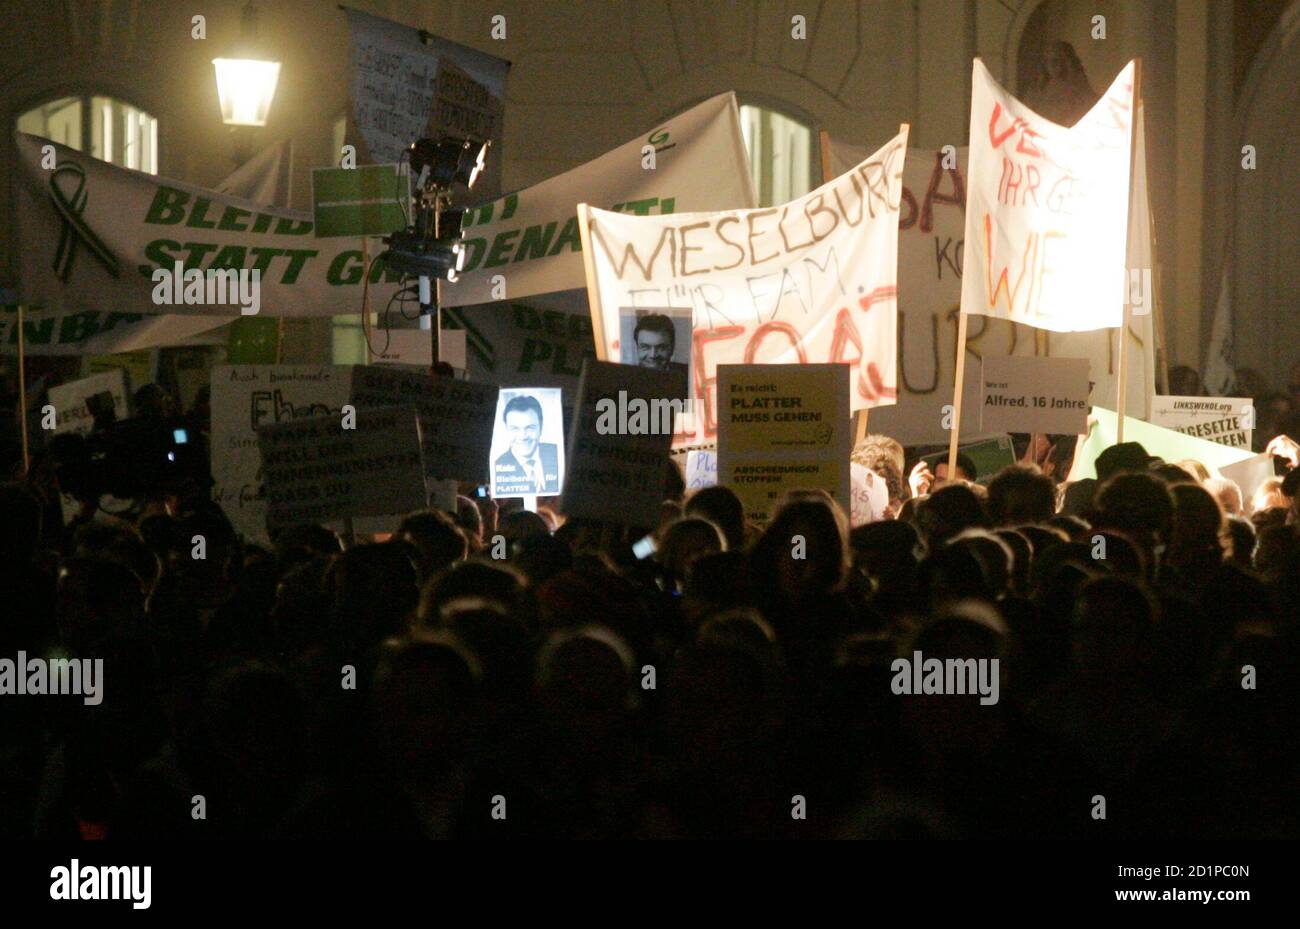 Austrian demonstrators protest against the deportation of asylum-seeking  families in Vienna October 9, 2007. A big debate in Austria started about  the deportation of well-integrated foreigners who seek asylum after a family